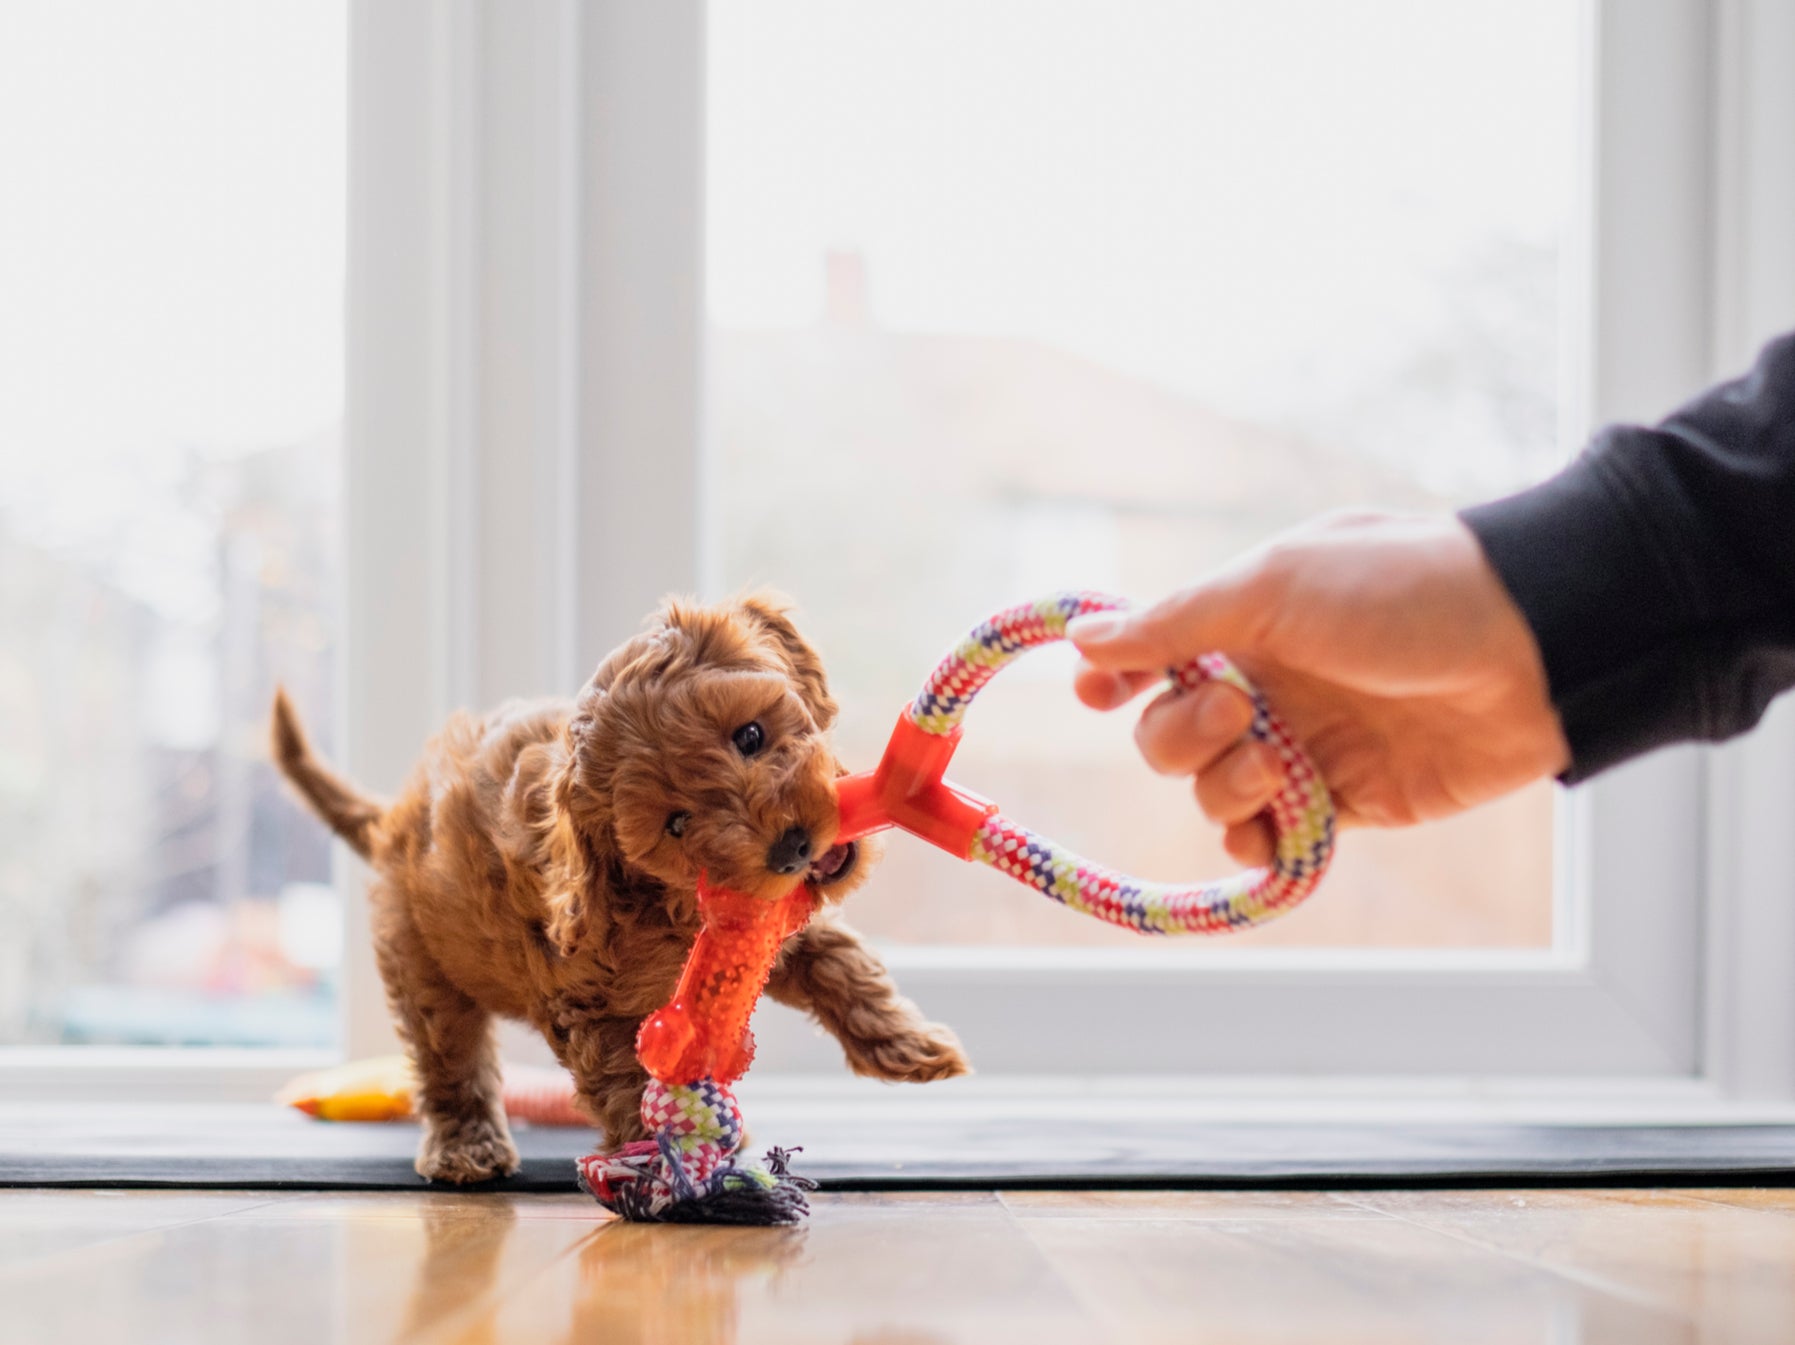 A puppy plays with a tug toy